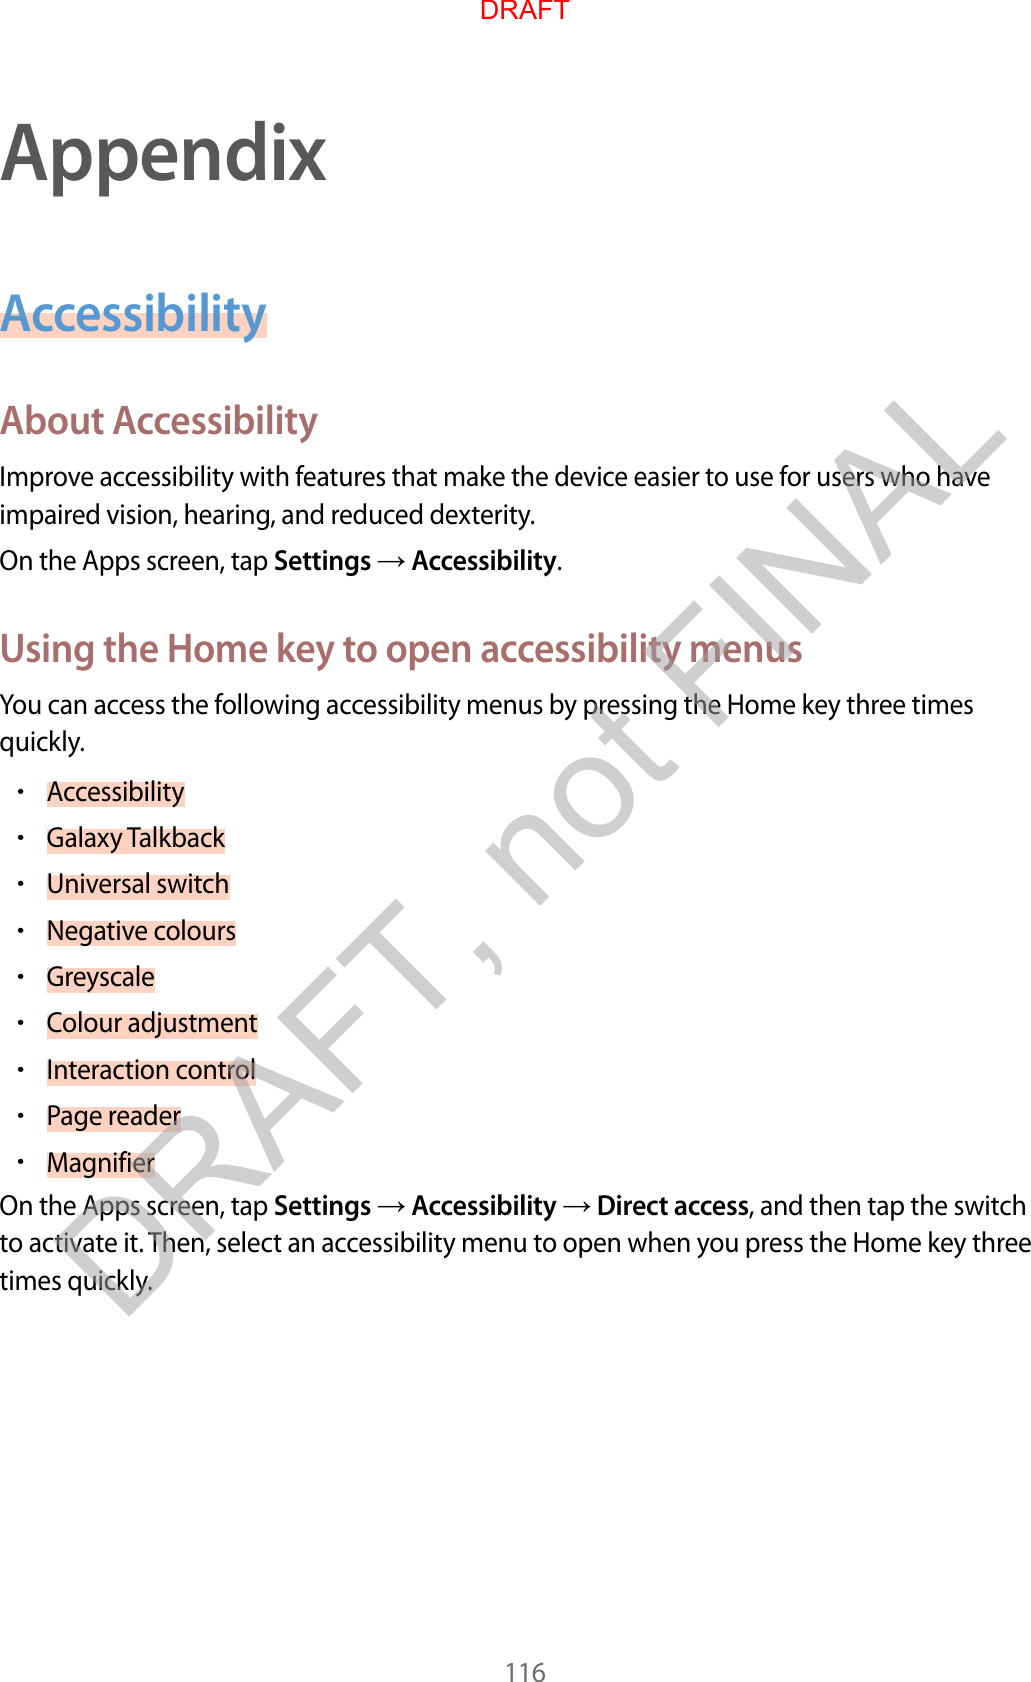 116AppendixAccessibilityAbout A c c essibilityImprove ac c essibility with featur es tha t make the device easier t o use f or users who ha v e impaired vision, hearing , and r educed de xterity.On the Apps screen, tap Settings  Accessibility.Using the Home k ey t o open ac c essibility menusYou can access the follo wing acc essibility menus by pr essing the Home key thr ee times quickly.•Accessibility•Galaxy T alkback•Universal switch•Negative c olours•Greyscale•Colour adjustment•Interaction control•P age r eader•MagnifierOn the Apps screen, tap Settings  Accessibility  Direct access, and then tap the switch to activate it. T hen, select an accessibility menu to open when you pr ess the Home key thr ee times quickly .DRAFTDRAFT, not FINAL